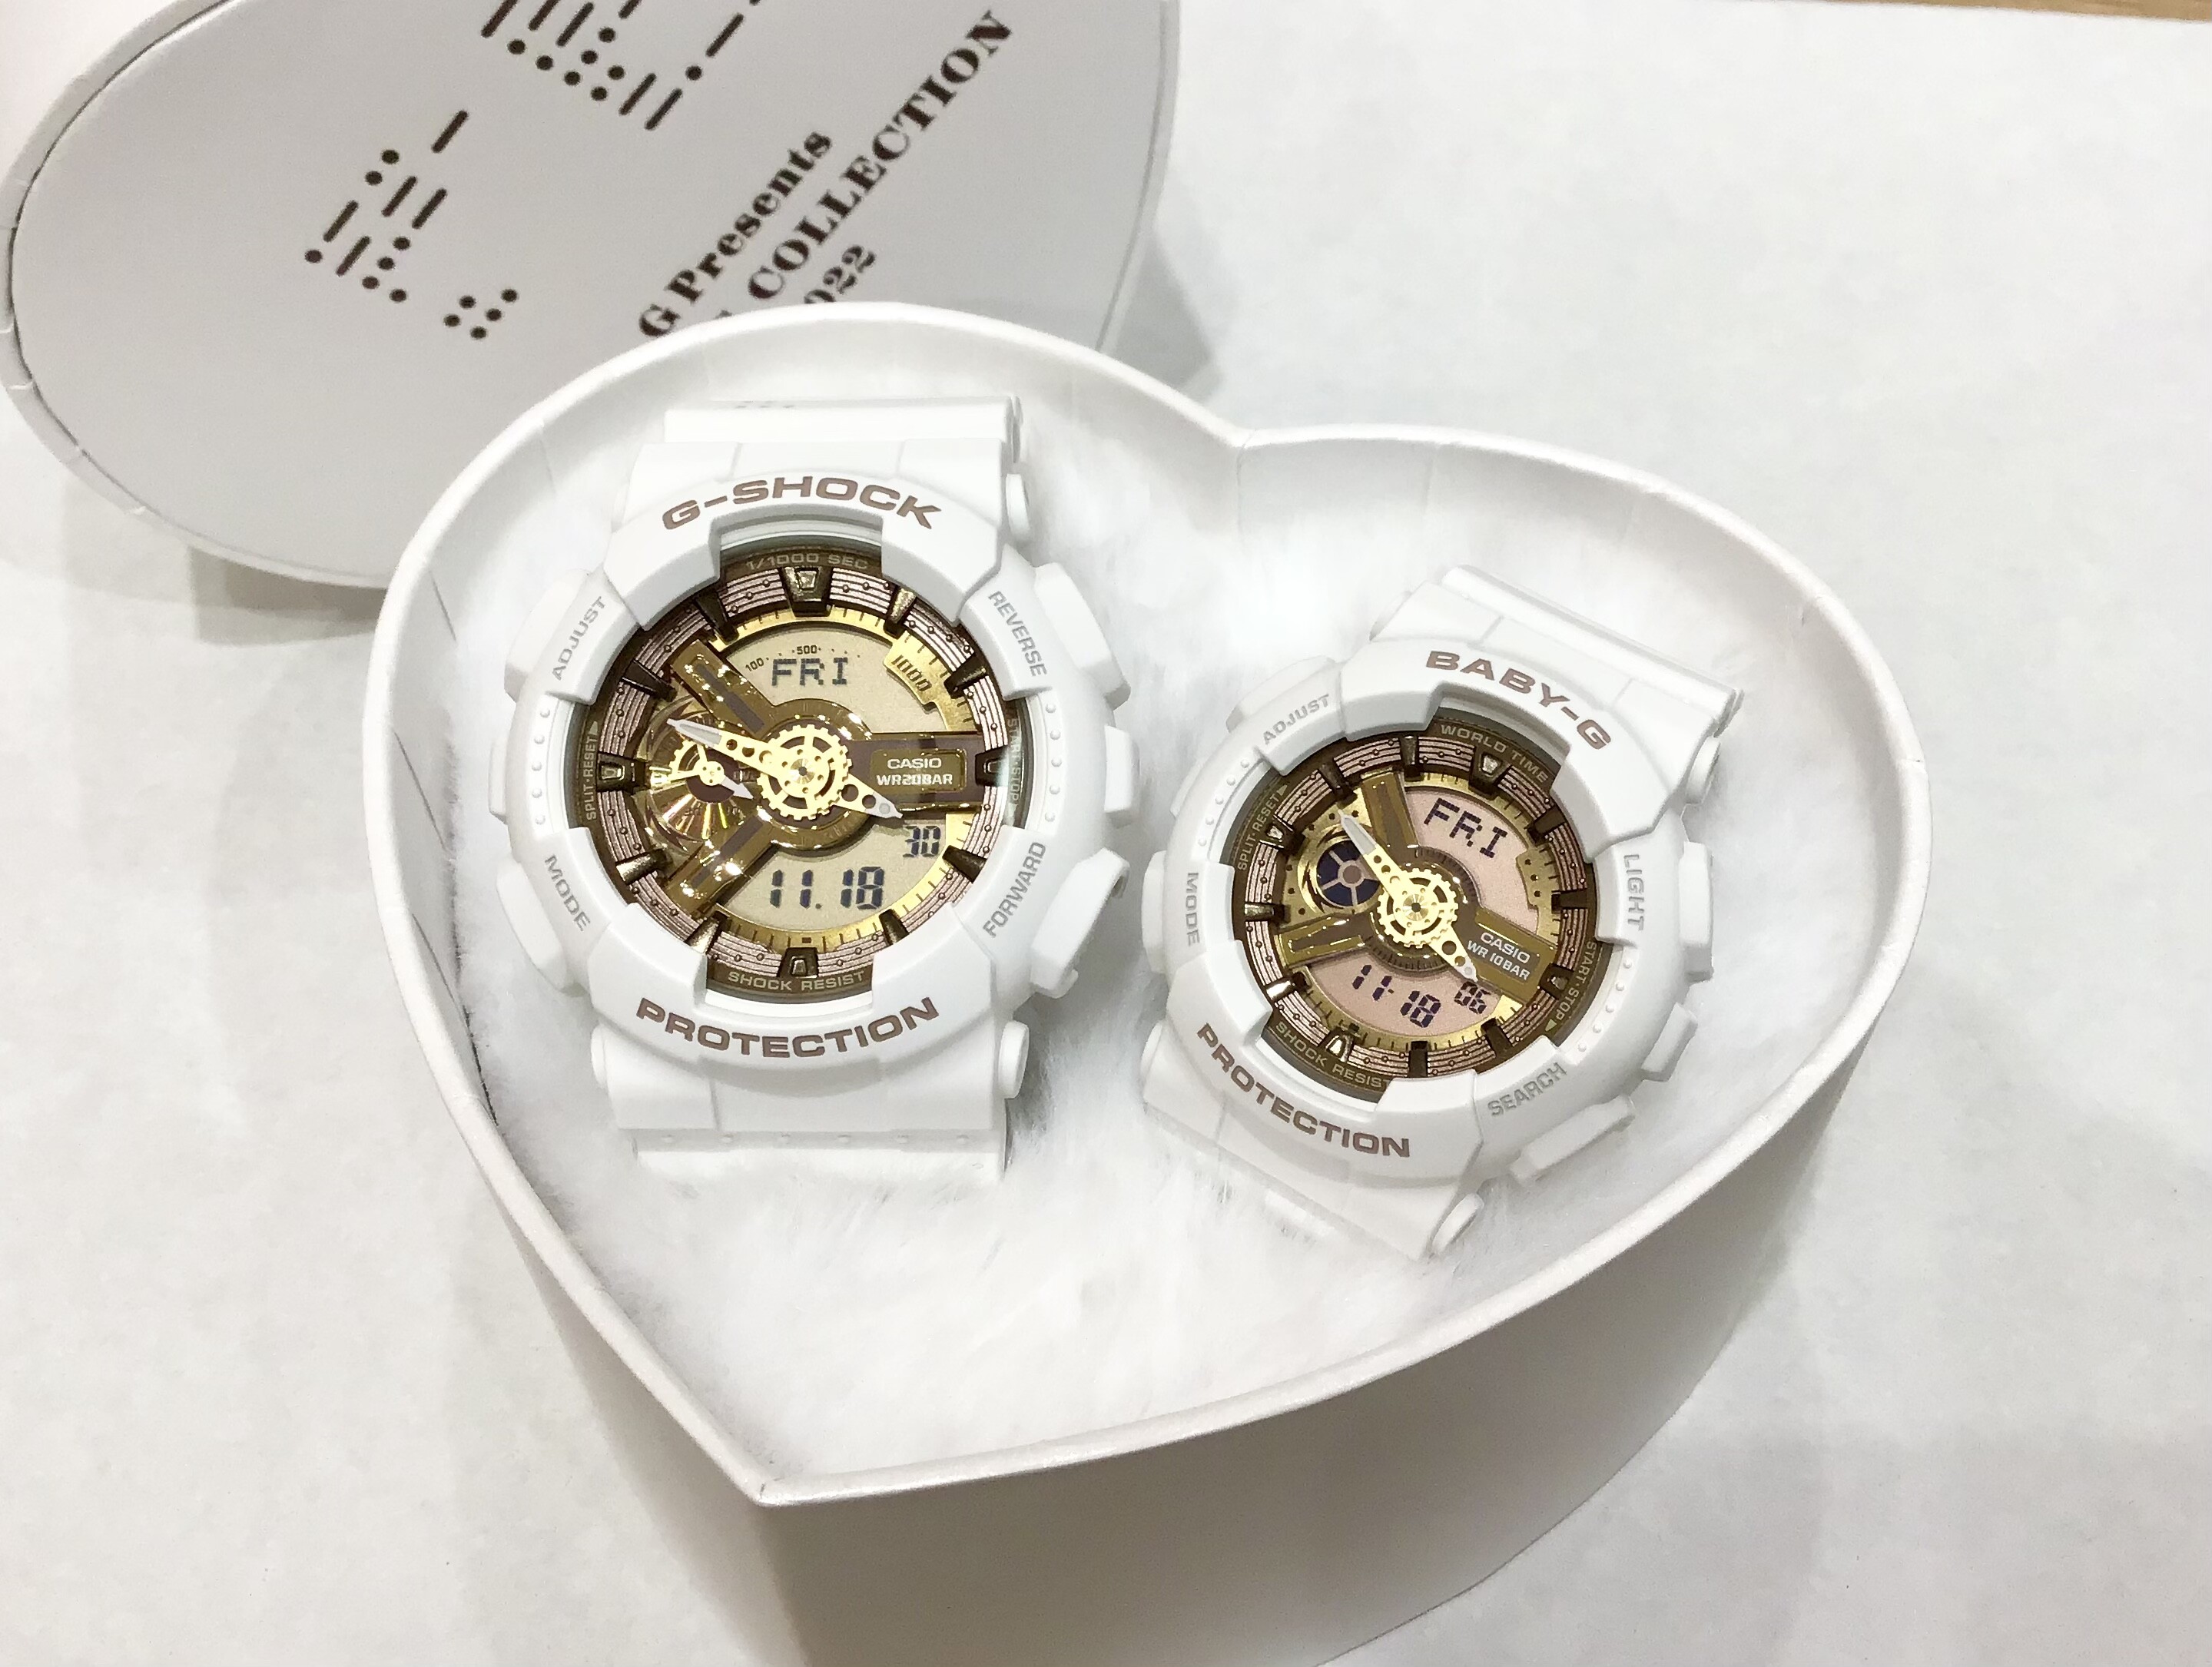 【G-SHOCK】今年のラバーズコレクションは2種類入荷　Lover's Collection　①